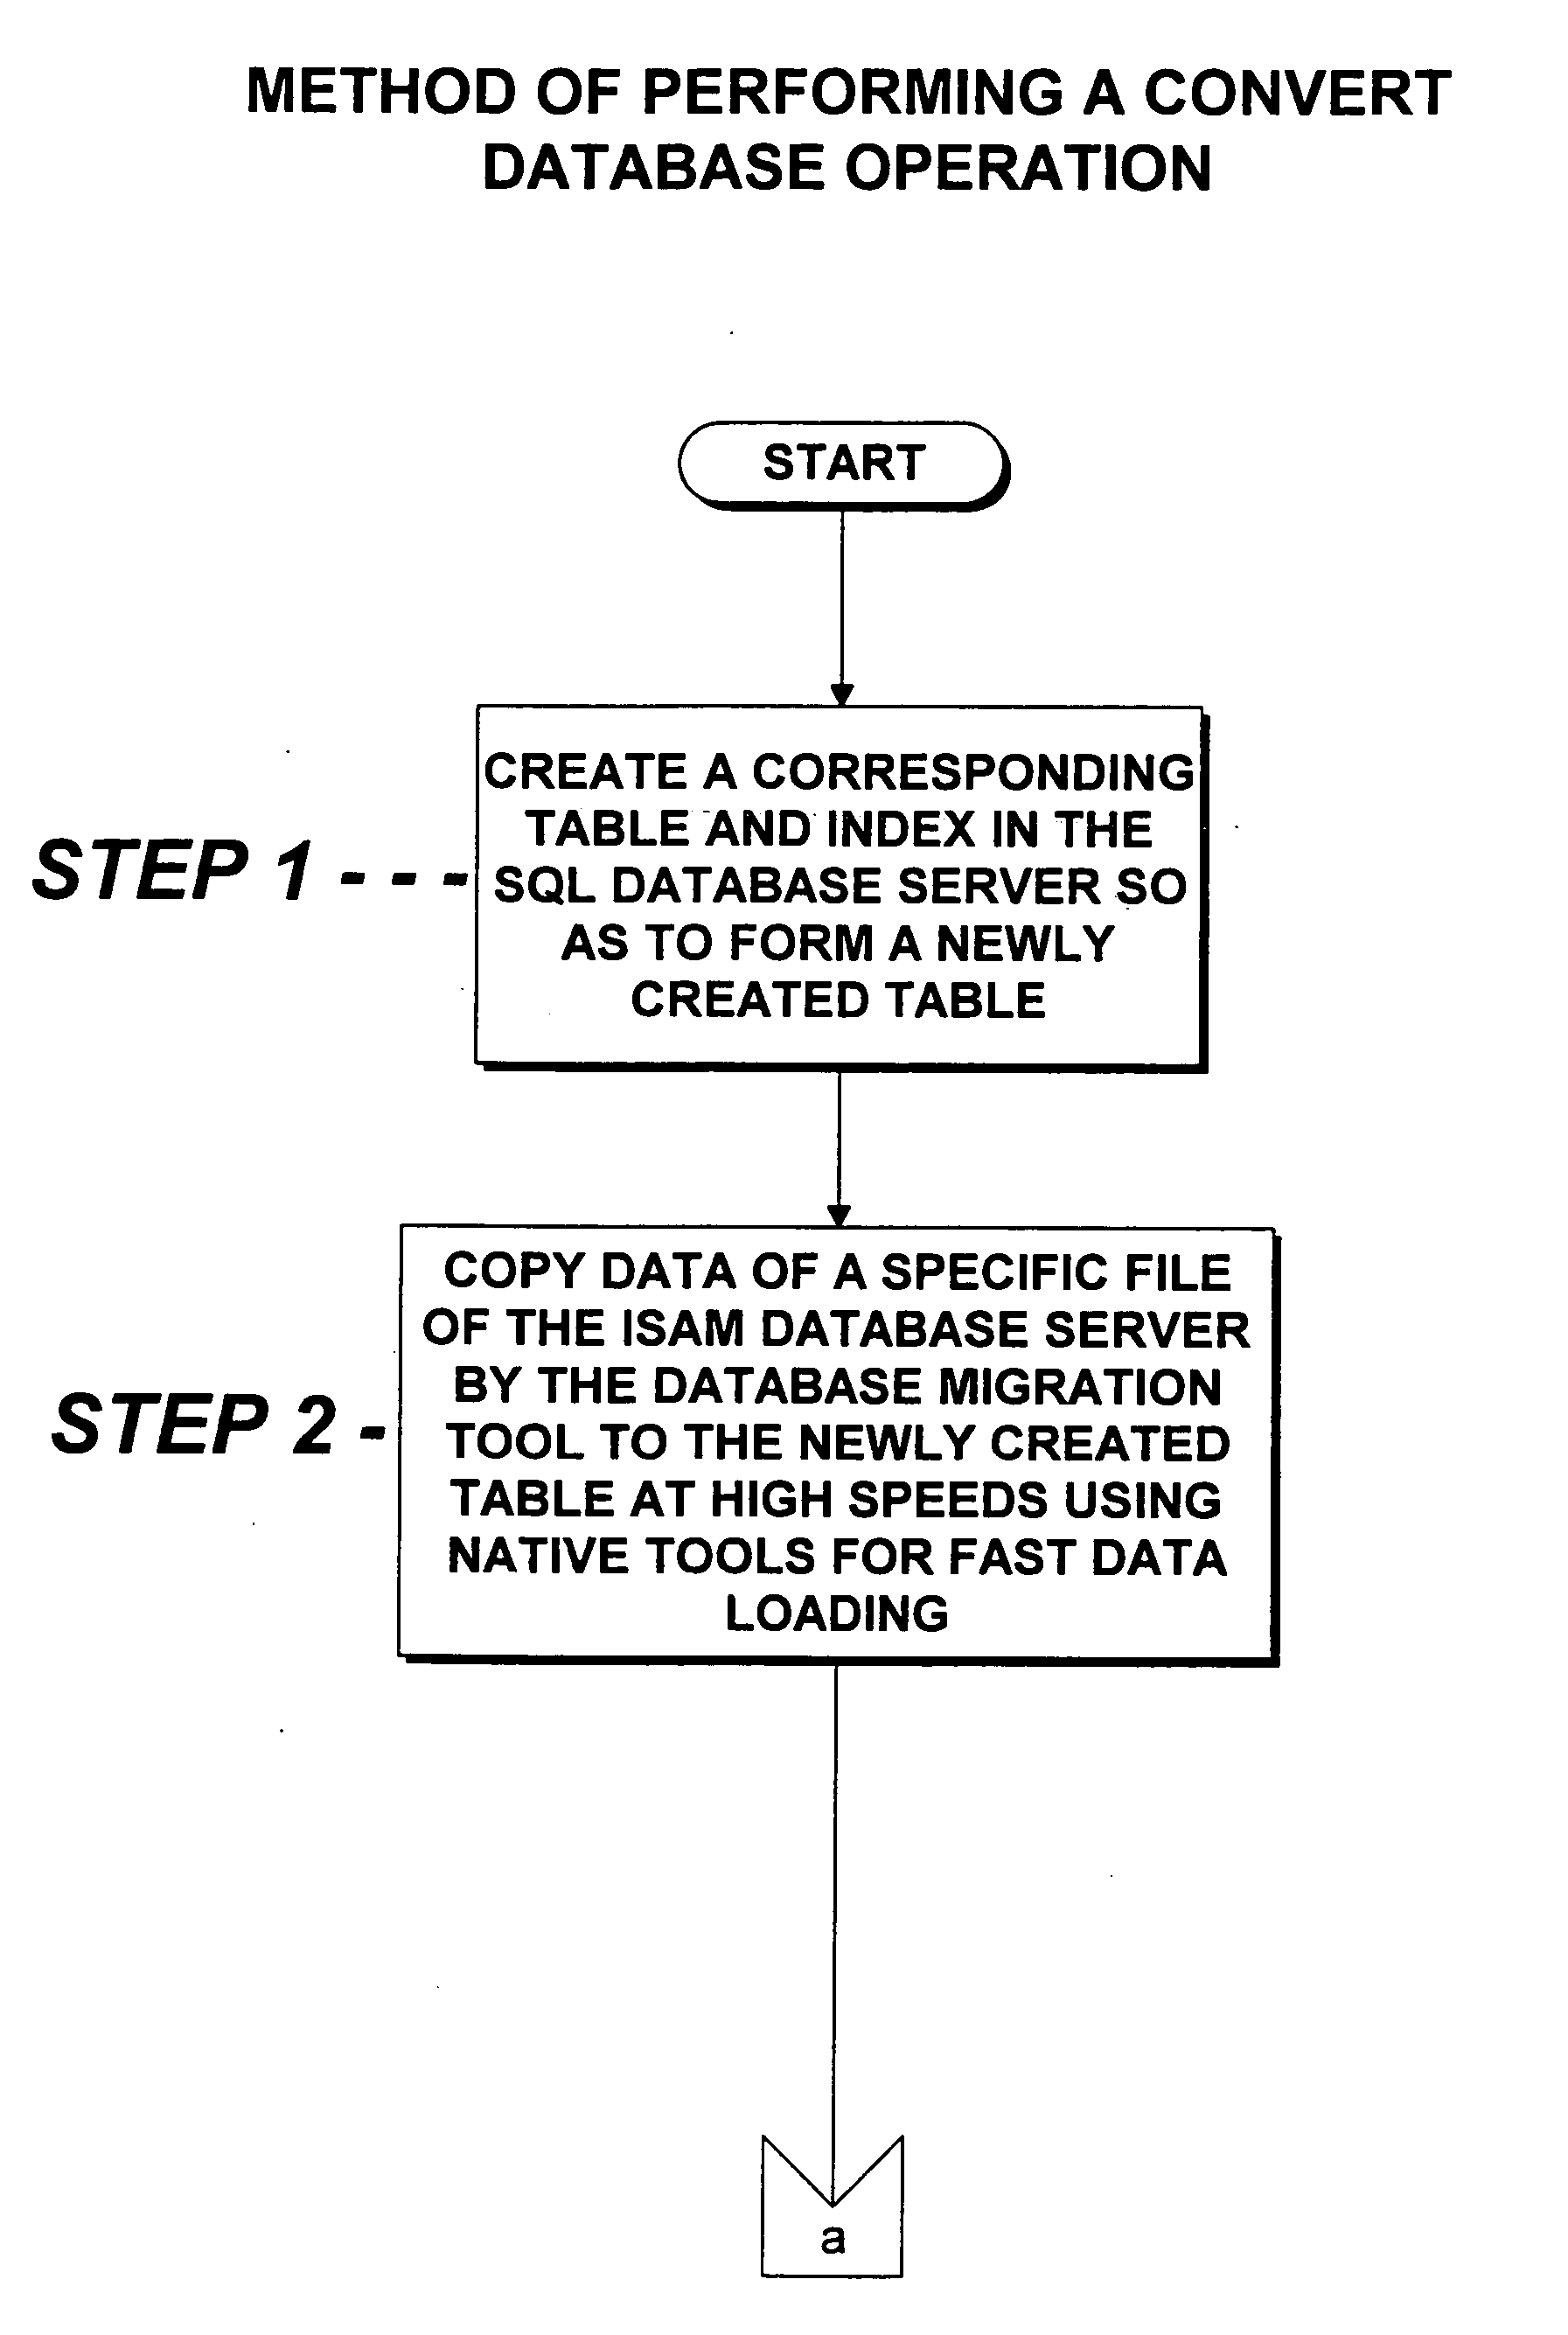 System and method for migrating an application developed around an ISAM database server to an SQL database server without source level changes